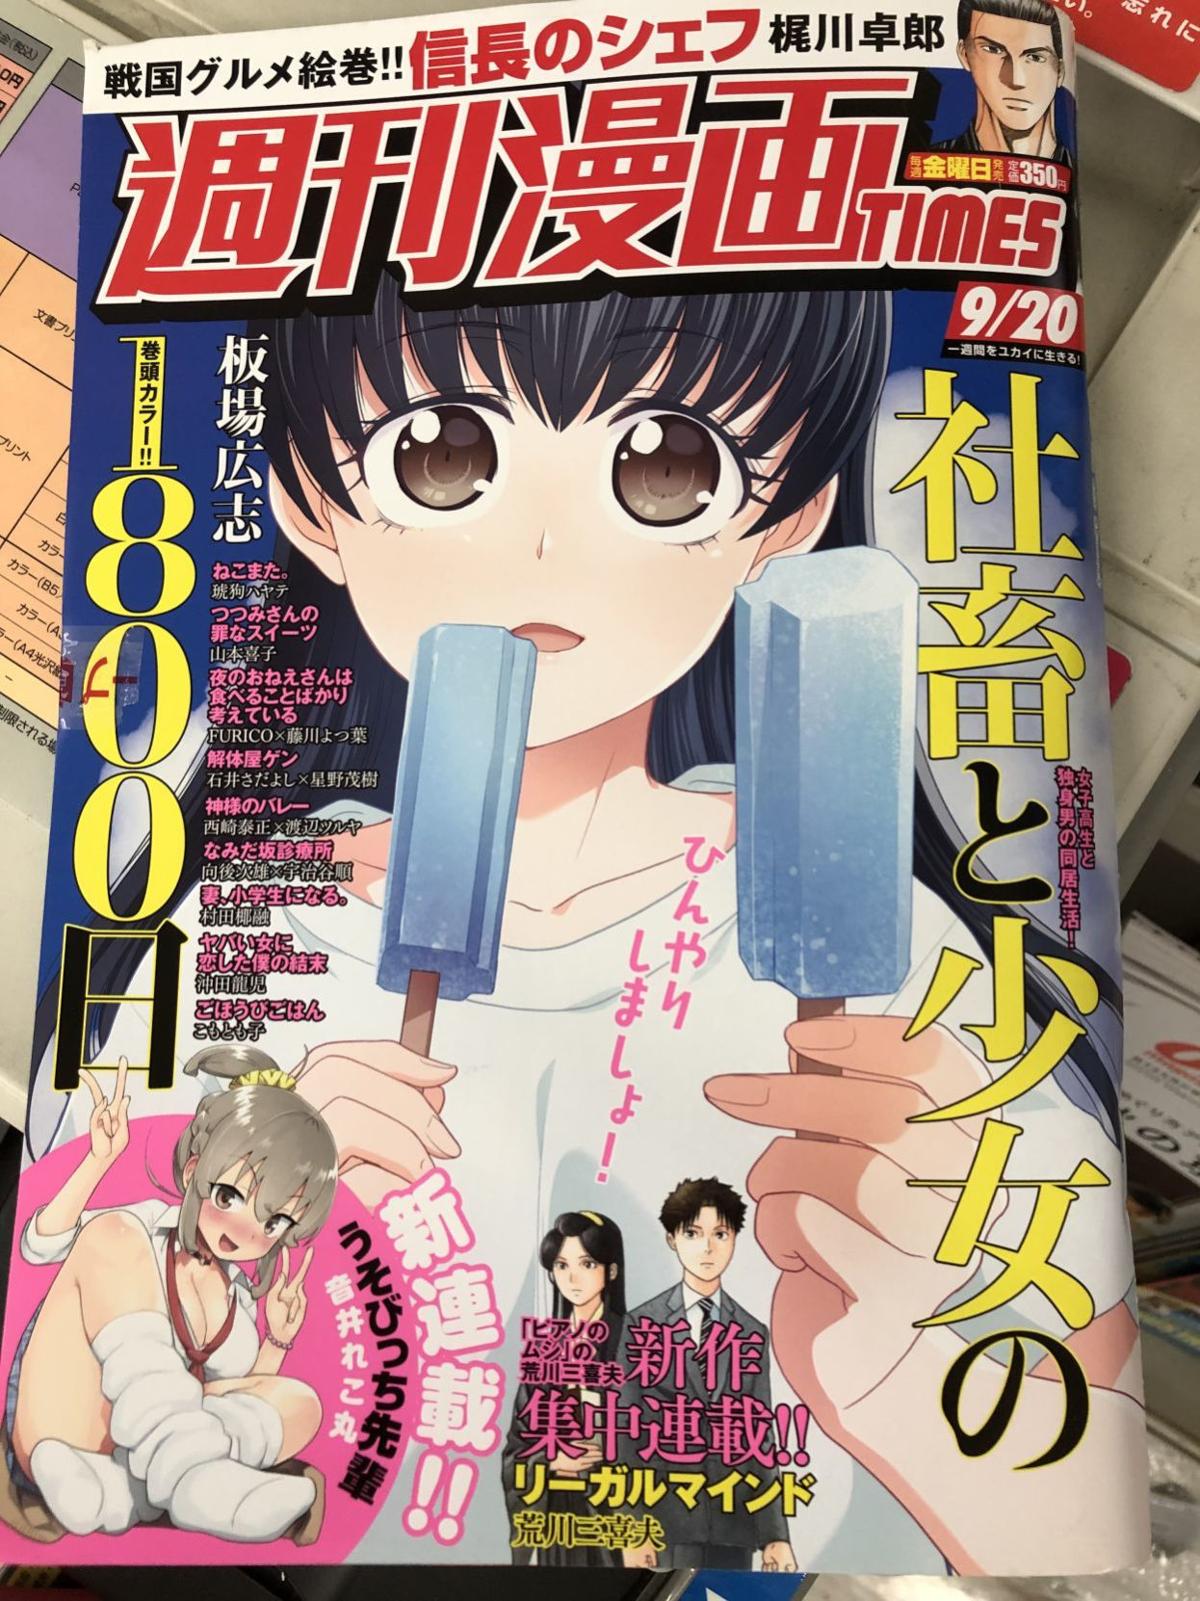 Japanese Anime For Collectors Columns Collectorsjournal Com